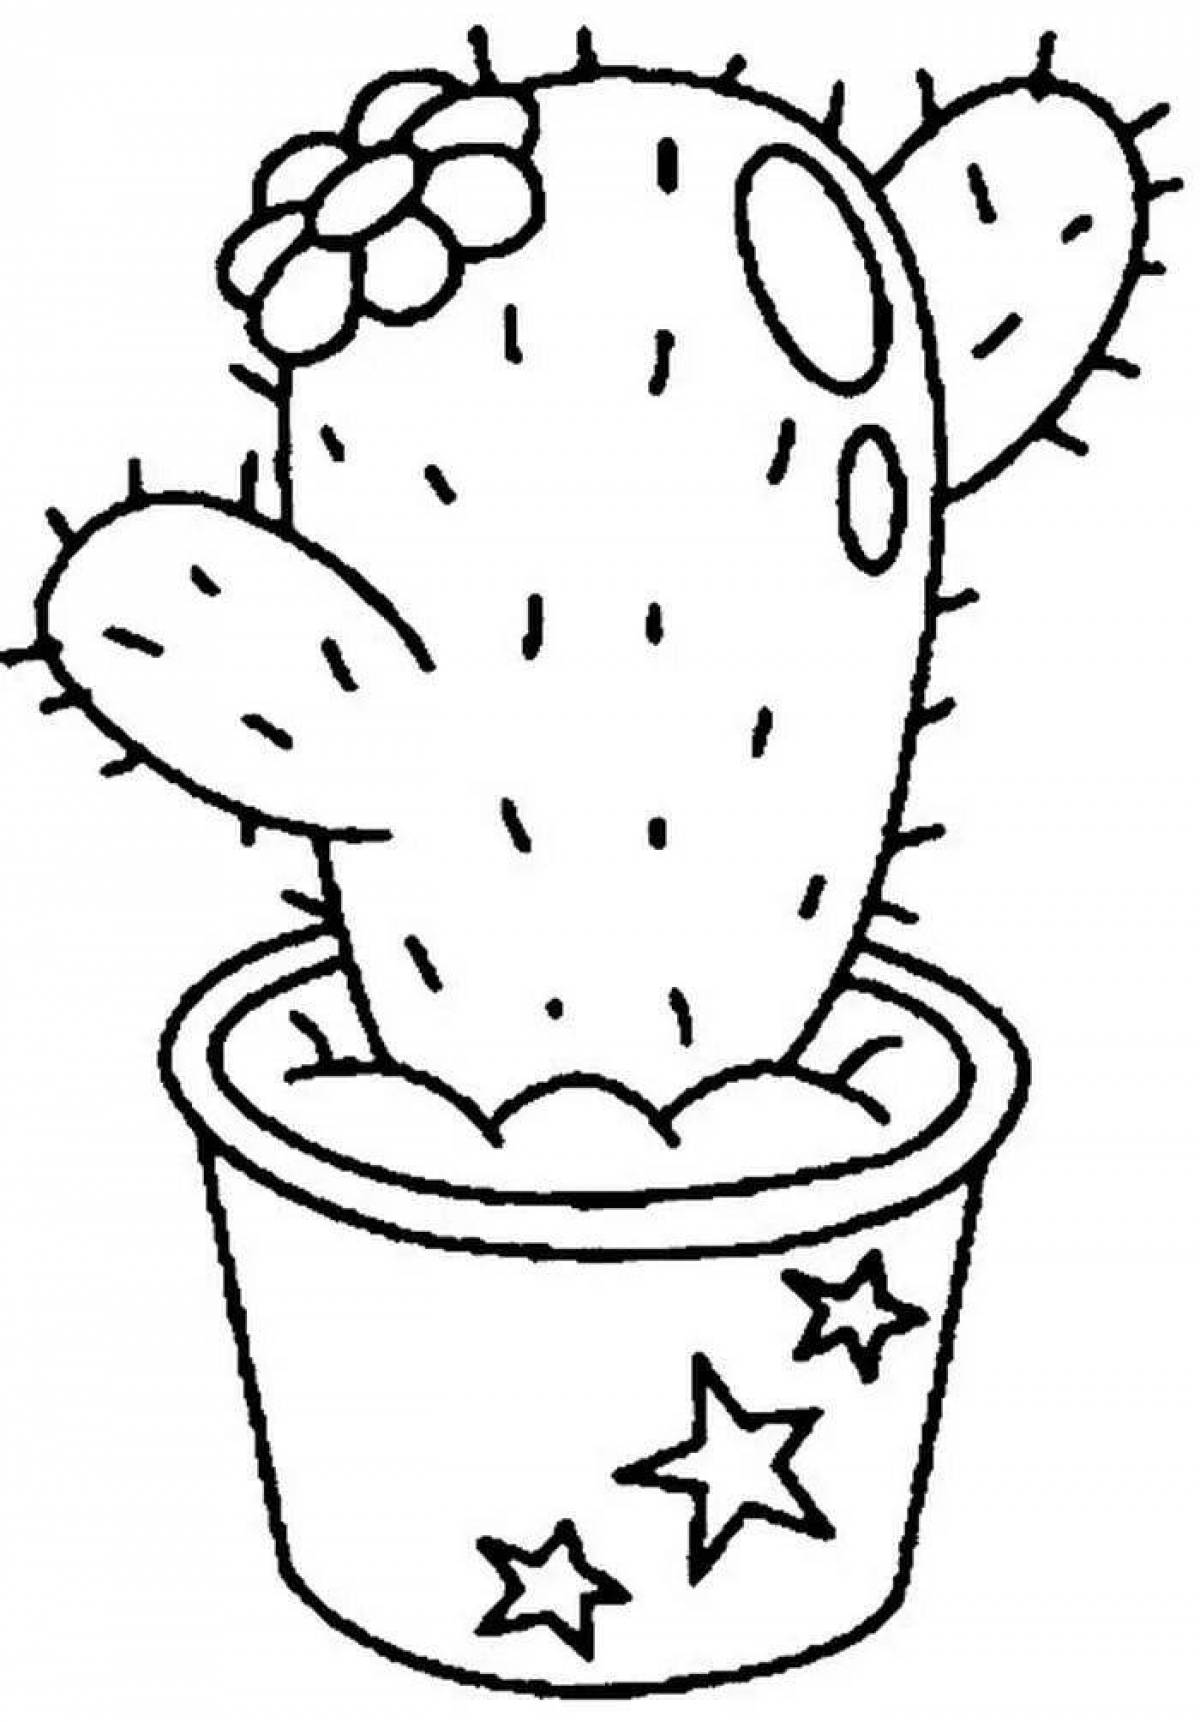 Potted cactus #14